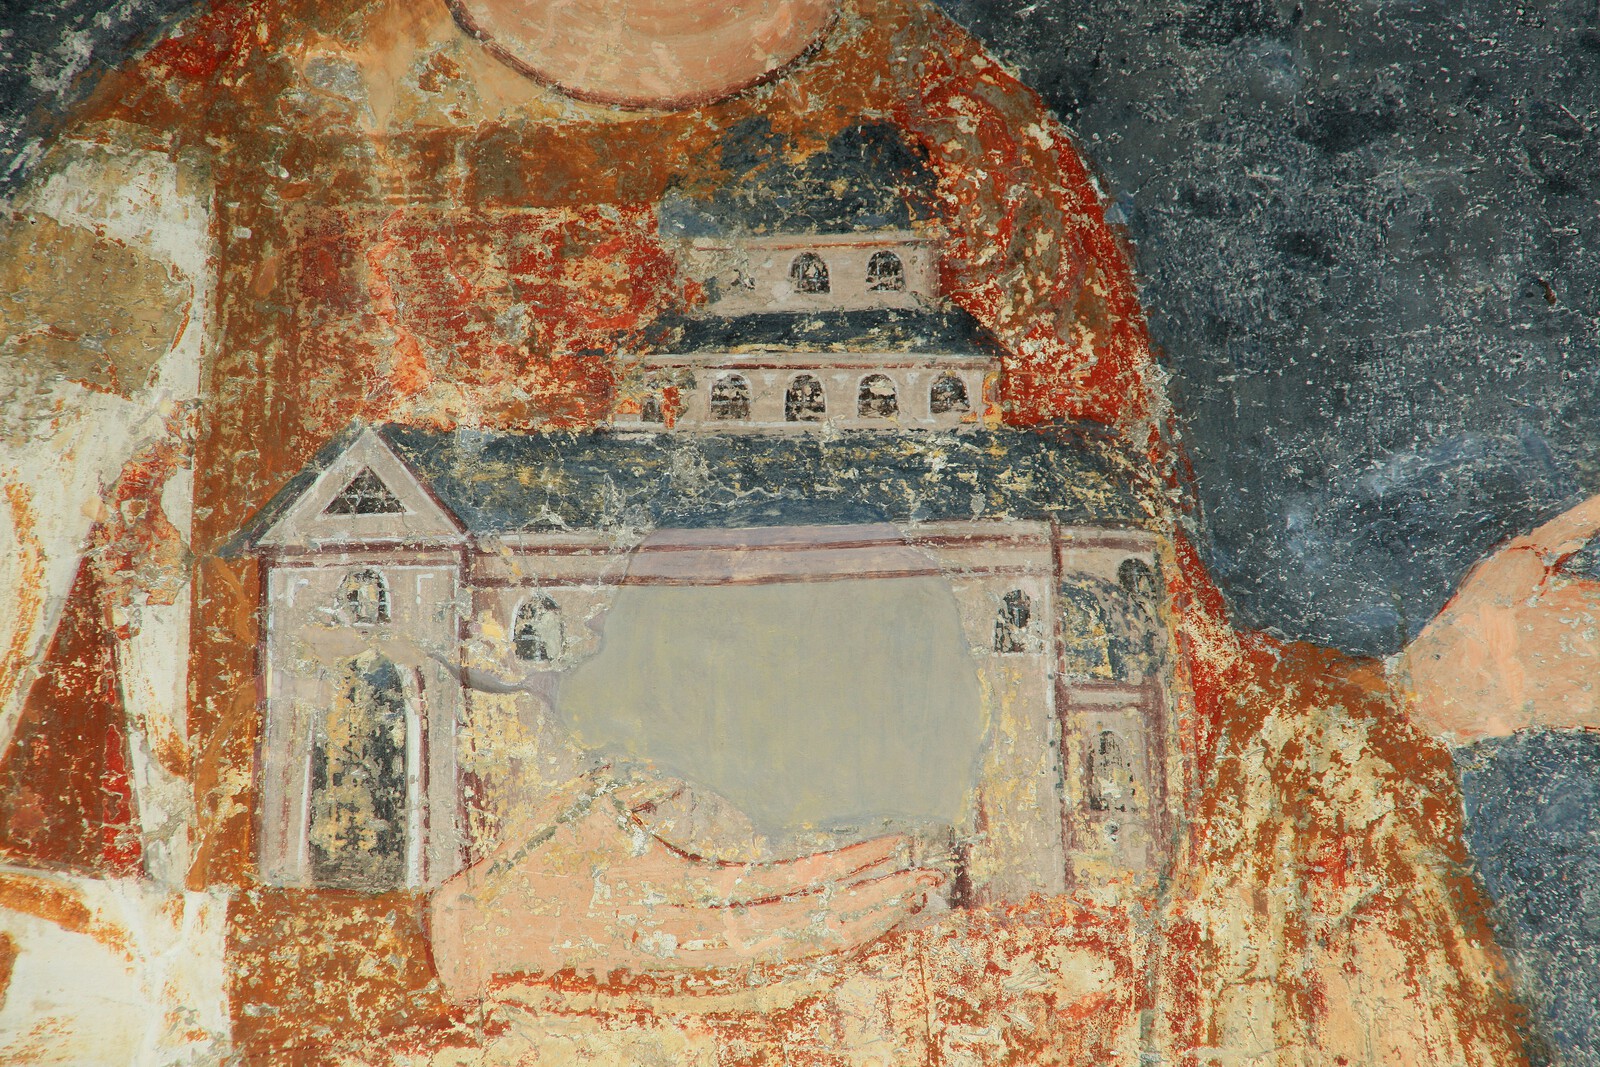 The Nemanjic Family Tree, detail, between 1222 and 1227